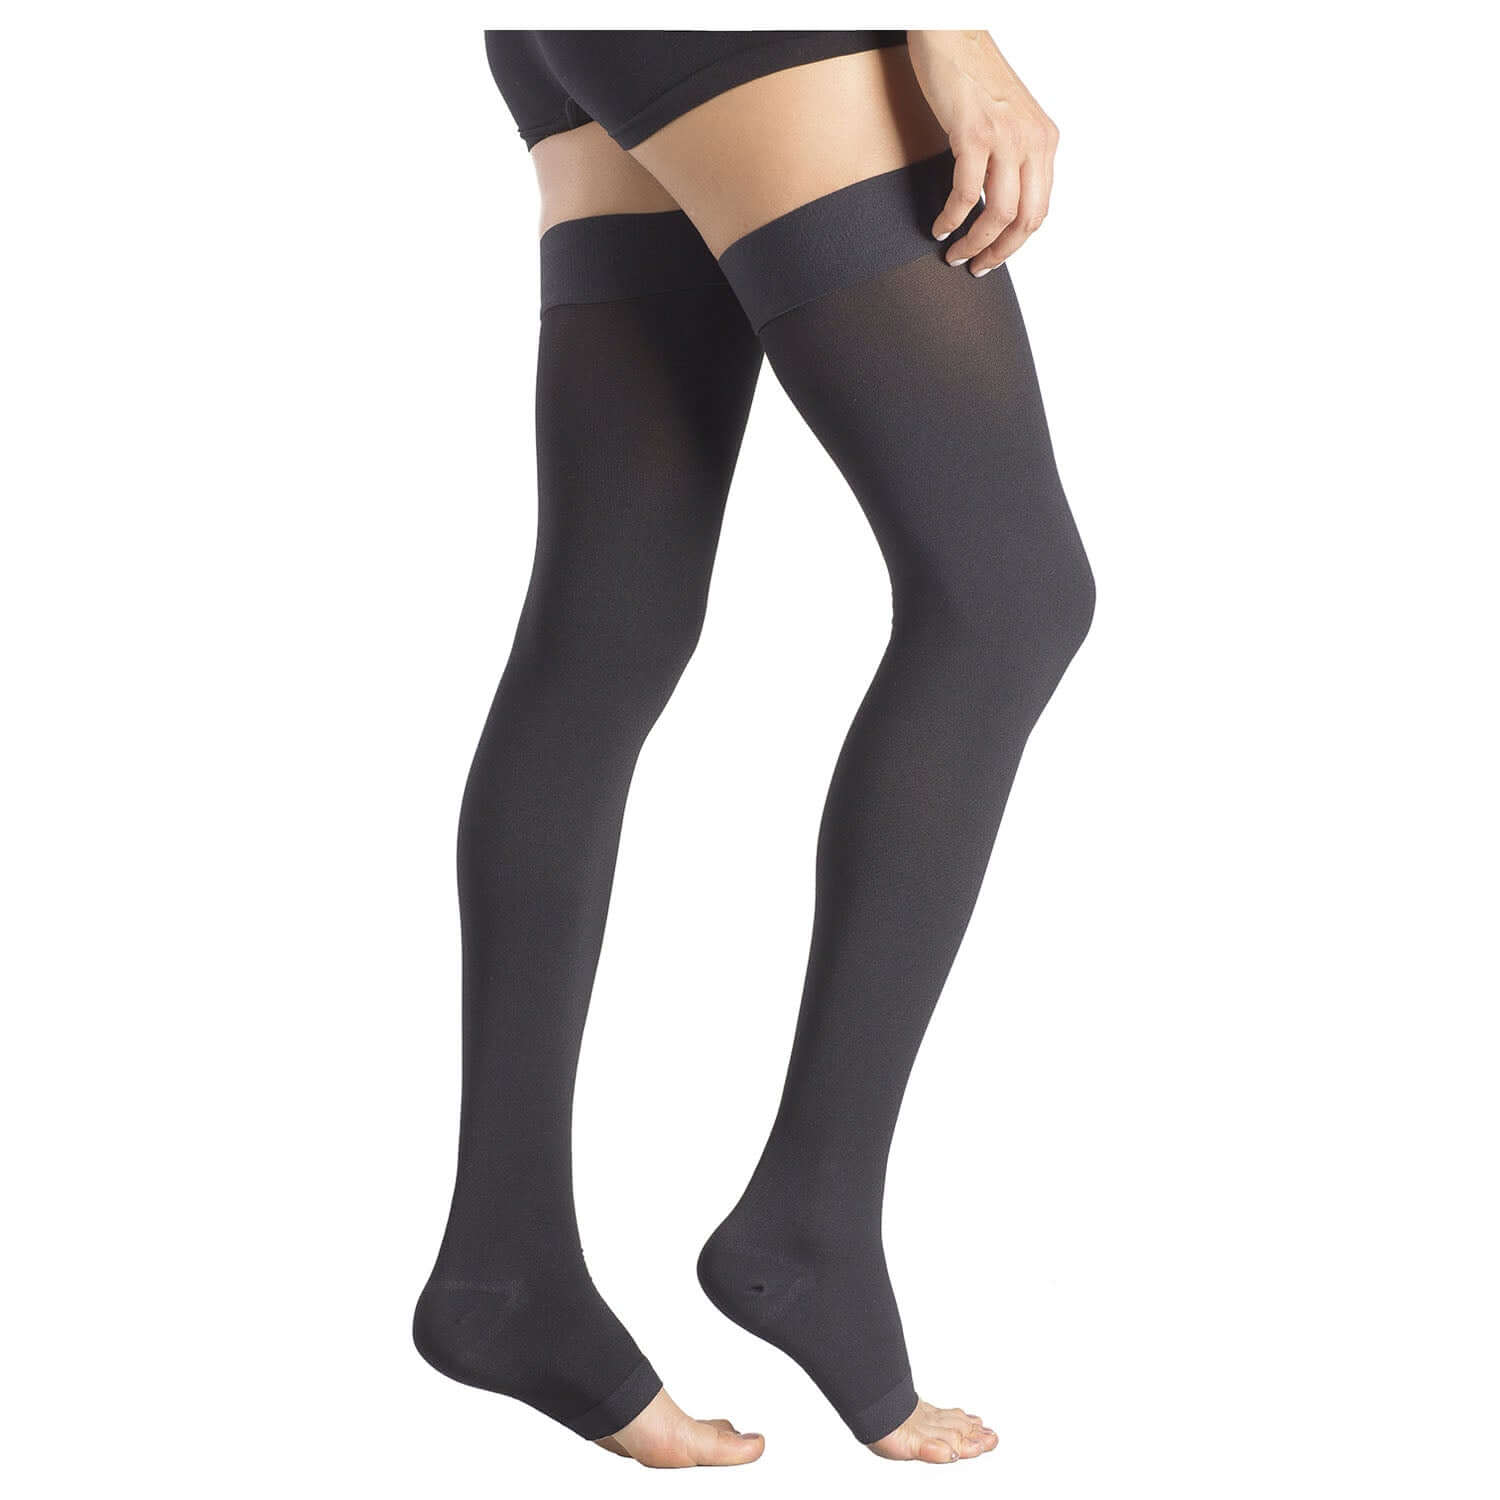  15-20mmHg Womens Graduated Compression Pantyhose Medical  Quality Ladies Support Stocking Blacks